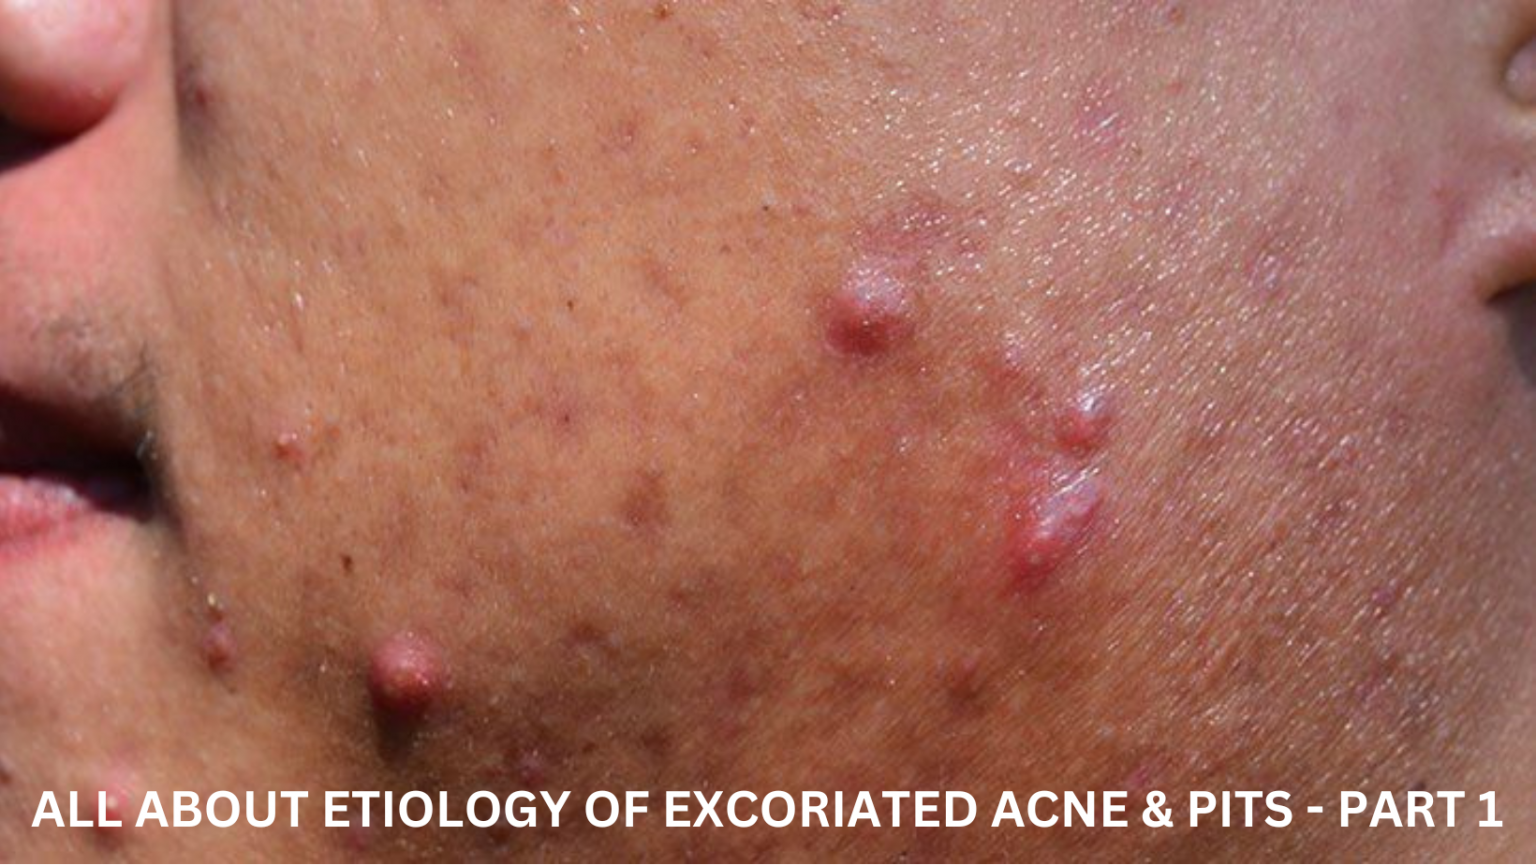 ALL ABOUT ETIOLOGY OF EXCORIATED ACNE & PITS – PART 1